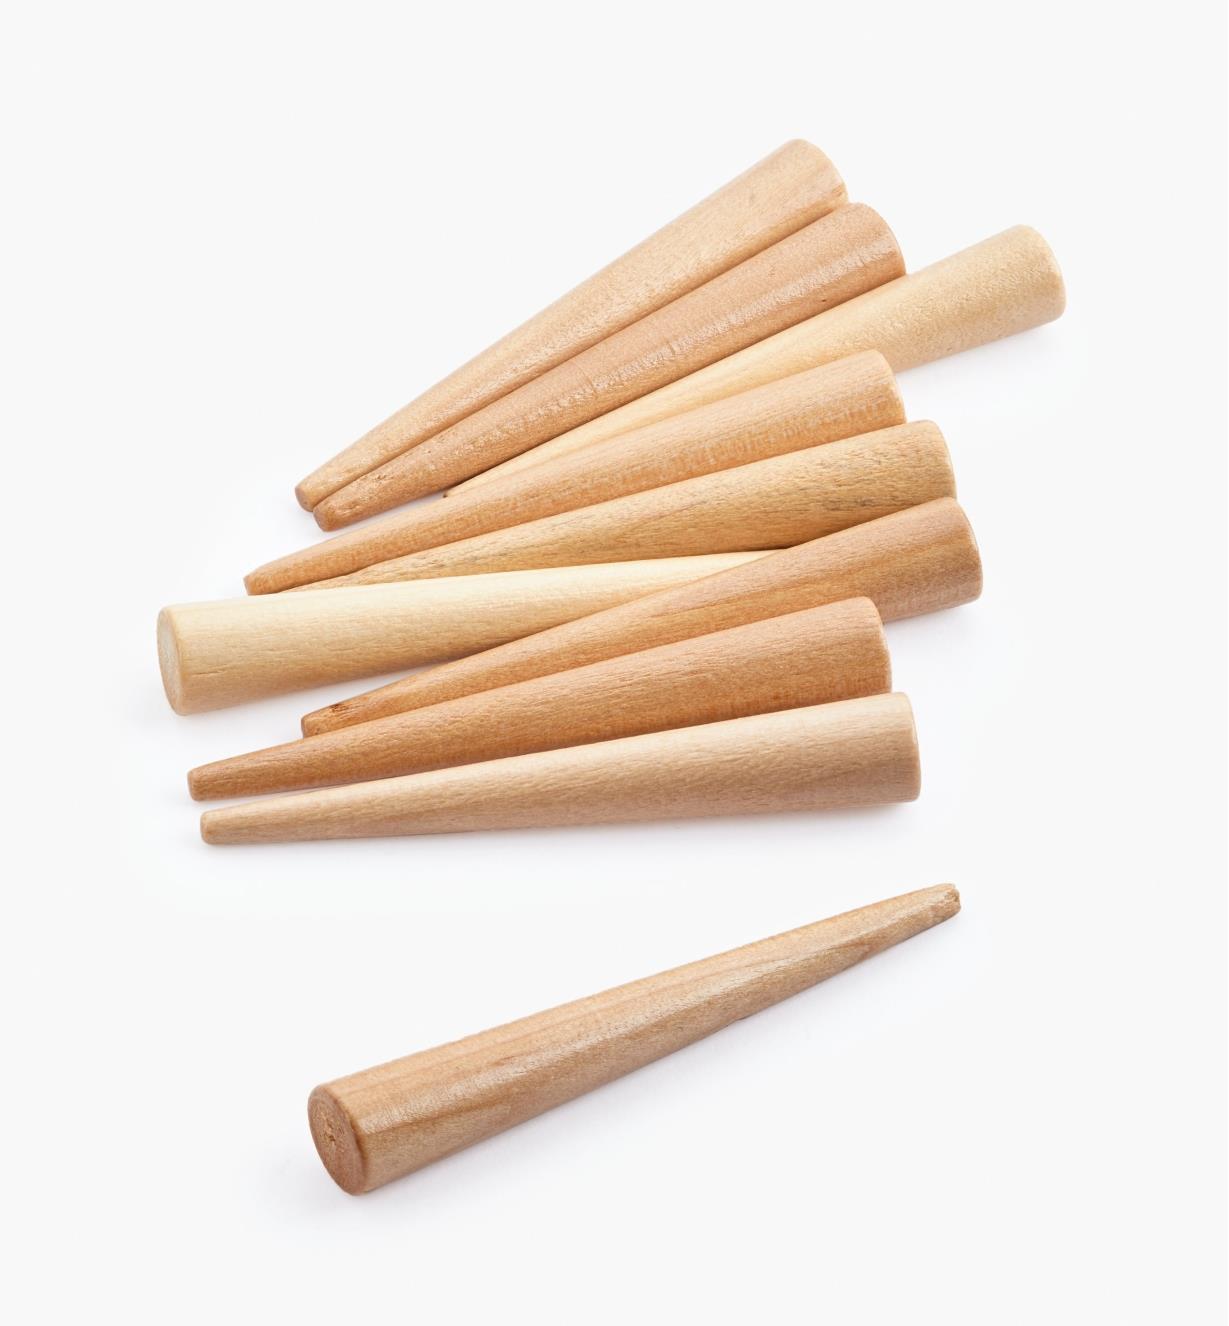 36K0341 - Caning Pegs (10)